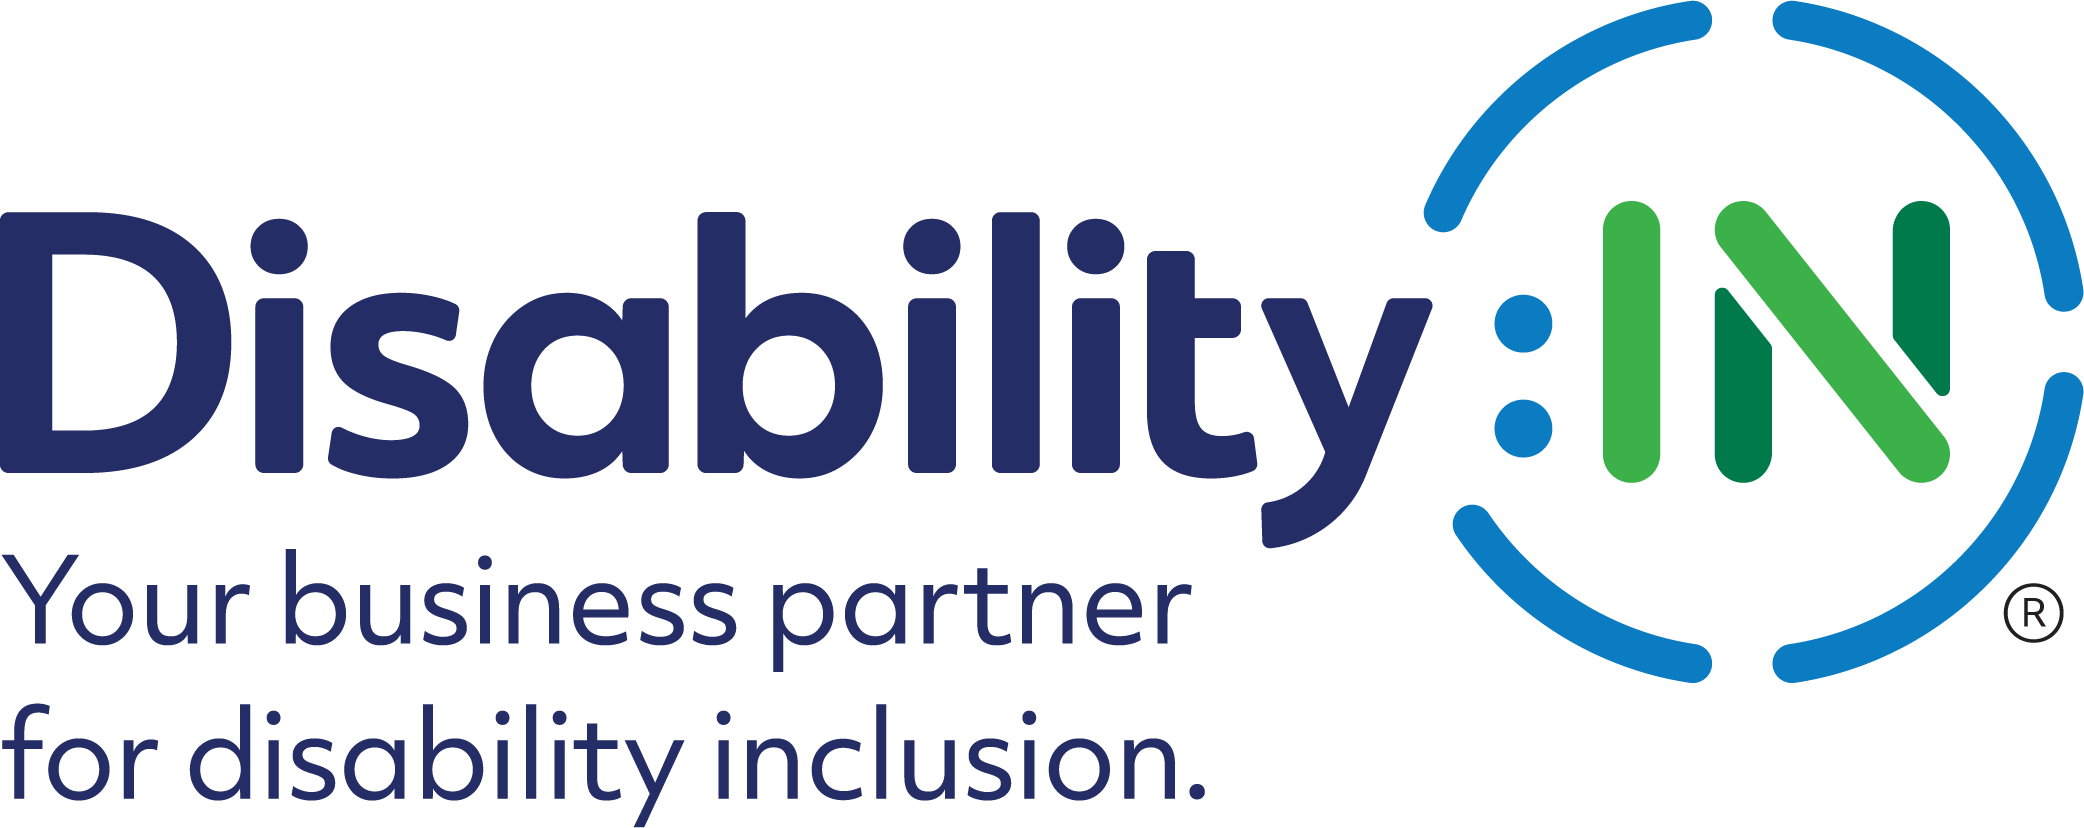 Disability:IN Your business partner for disability inclusion